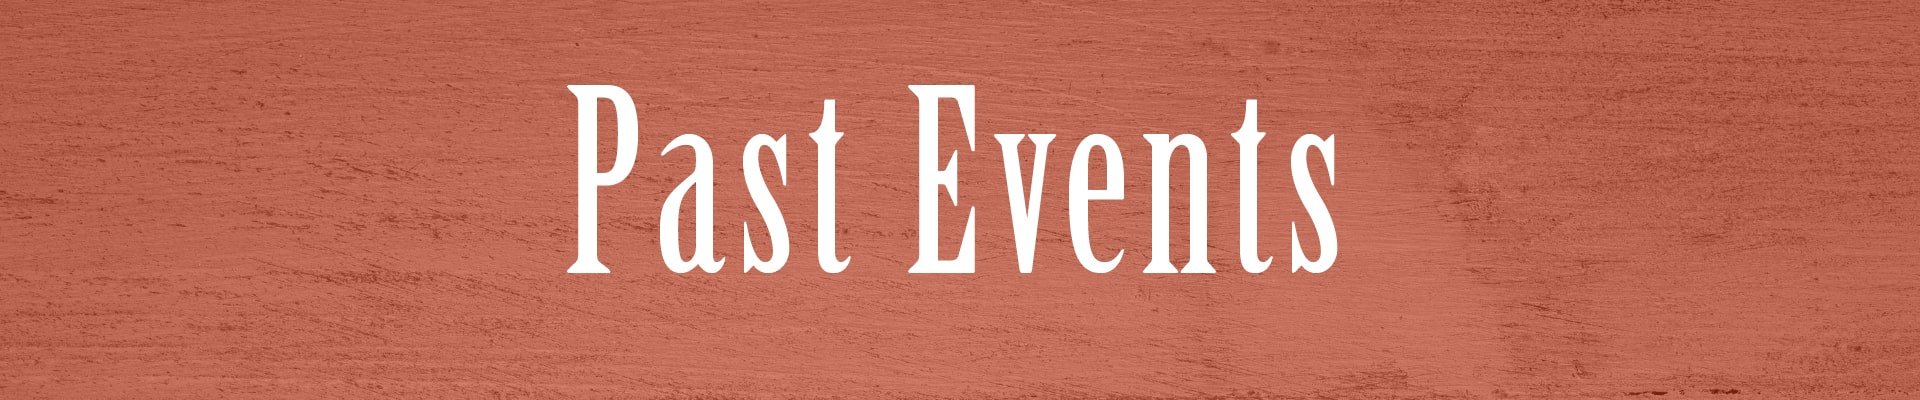 Past Events page header